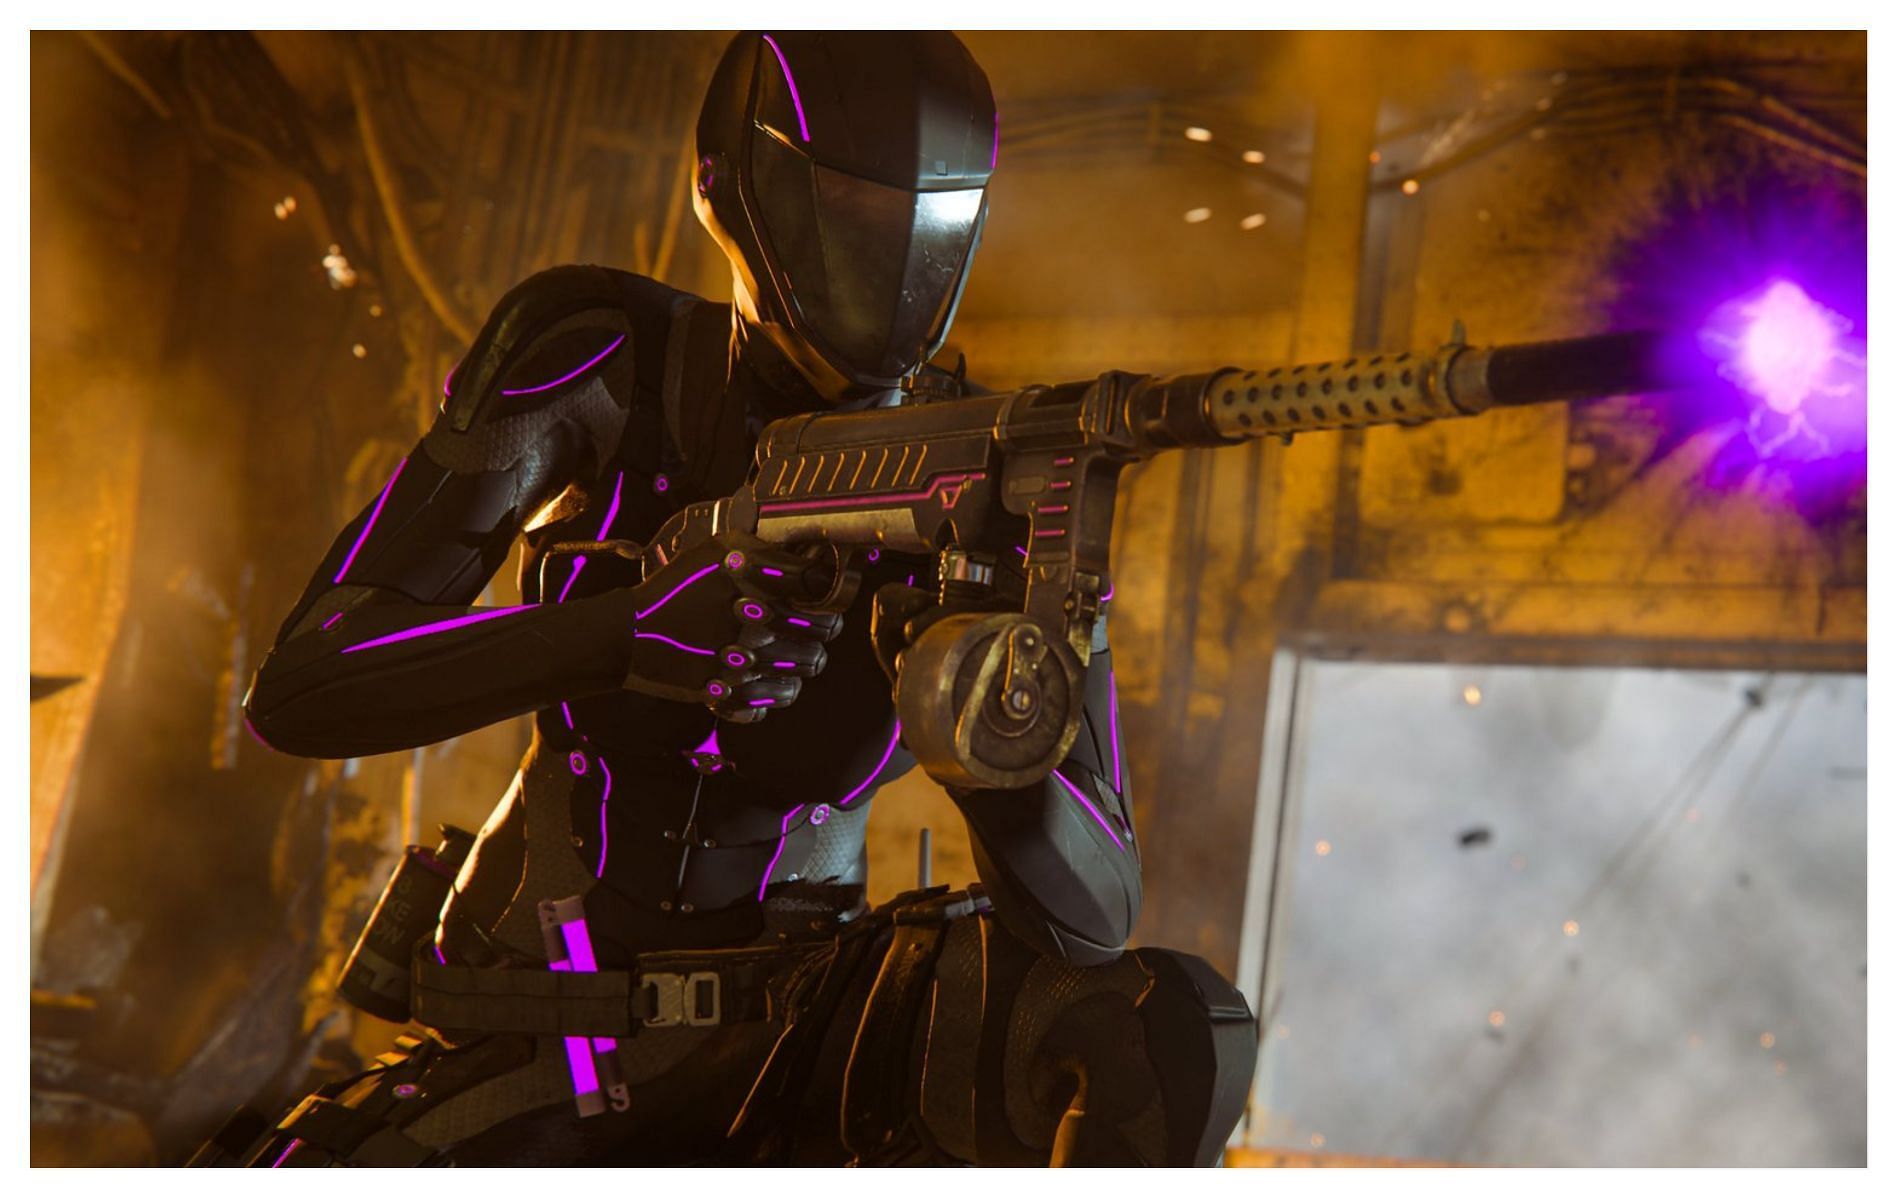 The Night Terror Florence skin a.k.a. &#039;Roze 3.0&#039; in Warzone (image via Activision)